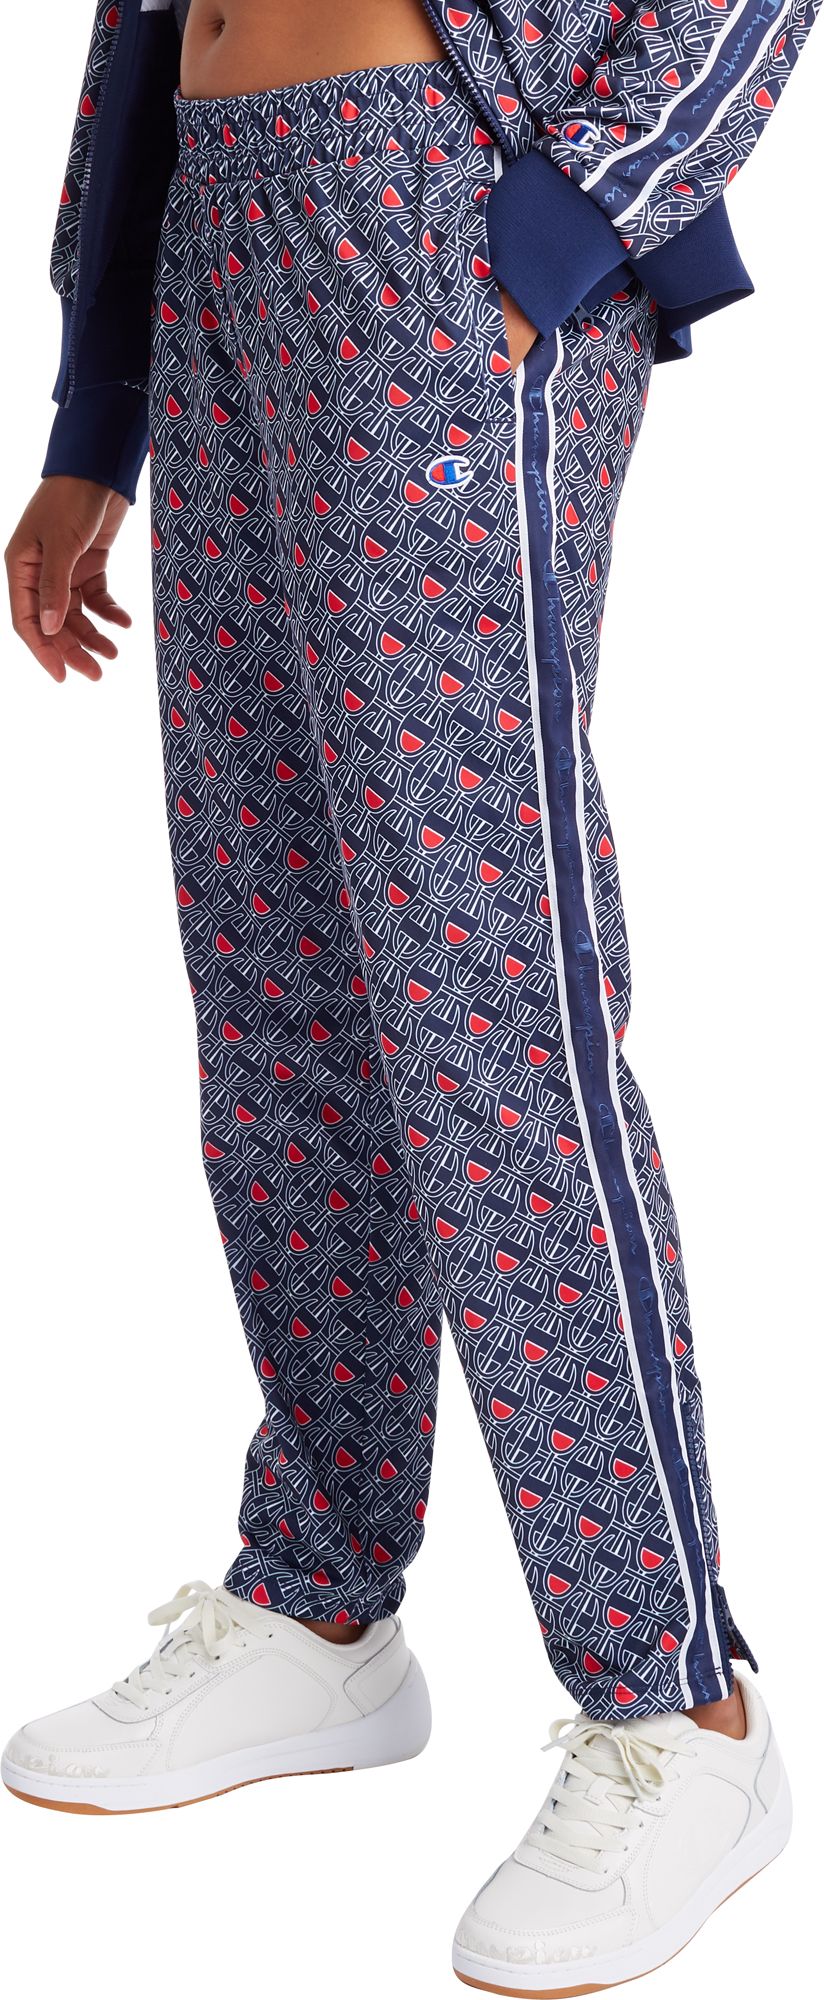 champion sweatpants with logo all over